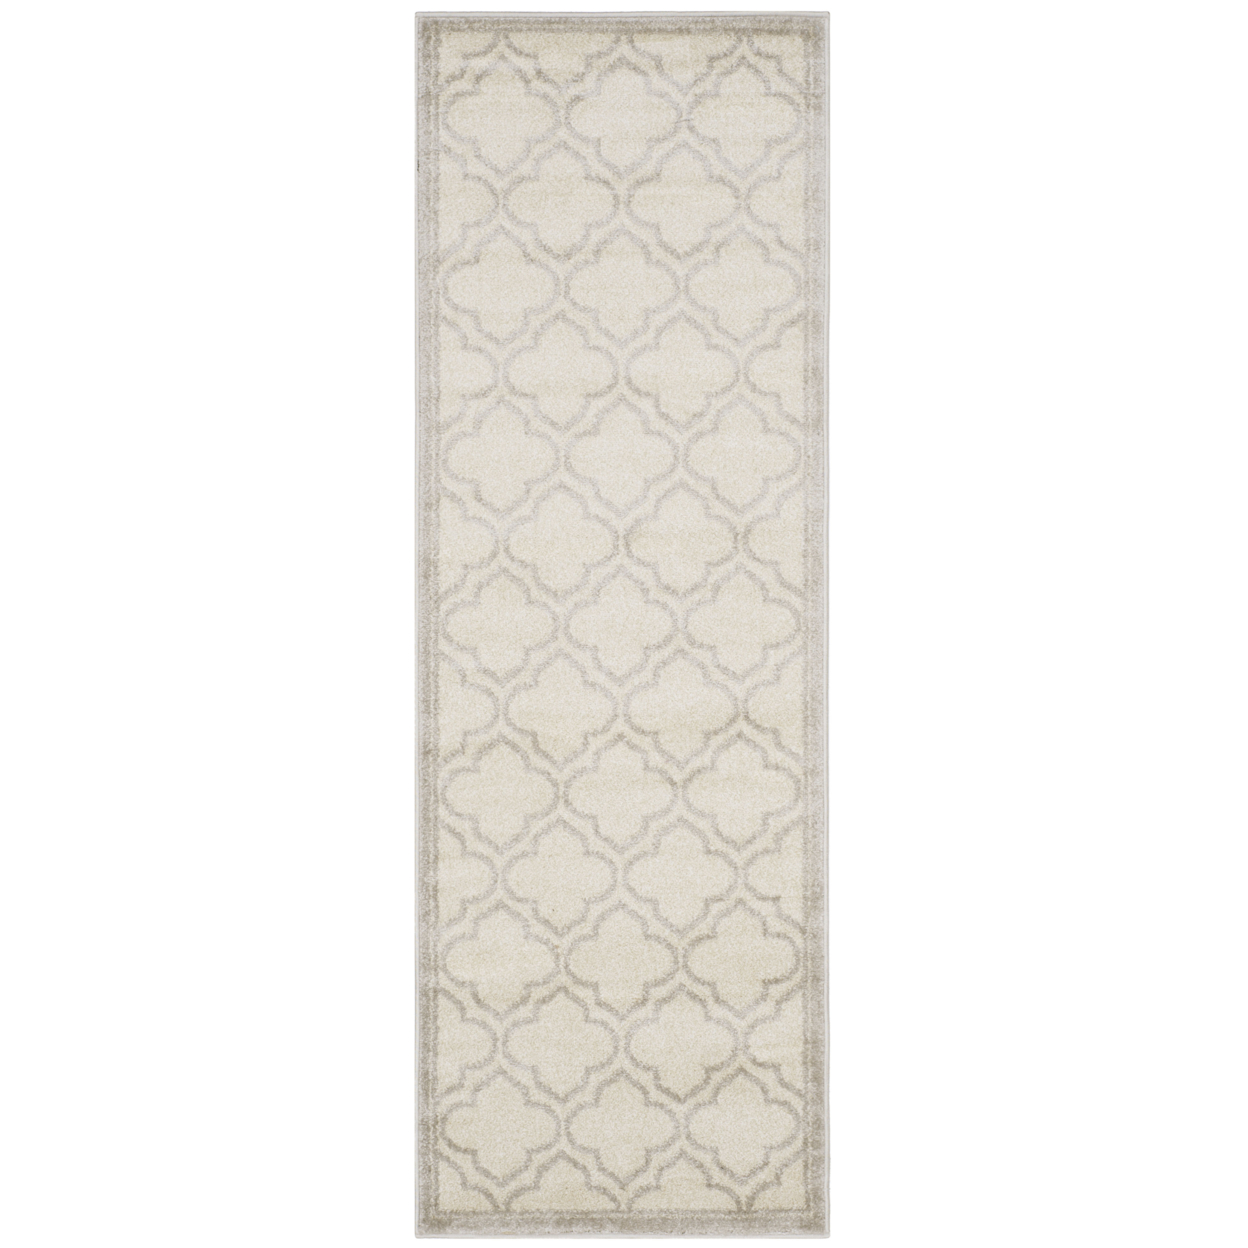 SAFAVIEH Amherst Collection AMT412E Ivory/Light Grey Rug - 2' 3 X 7'